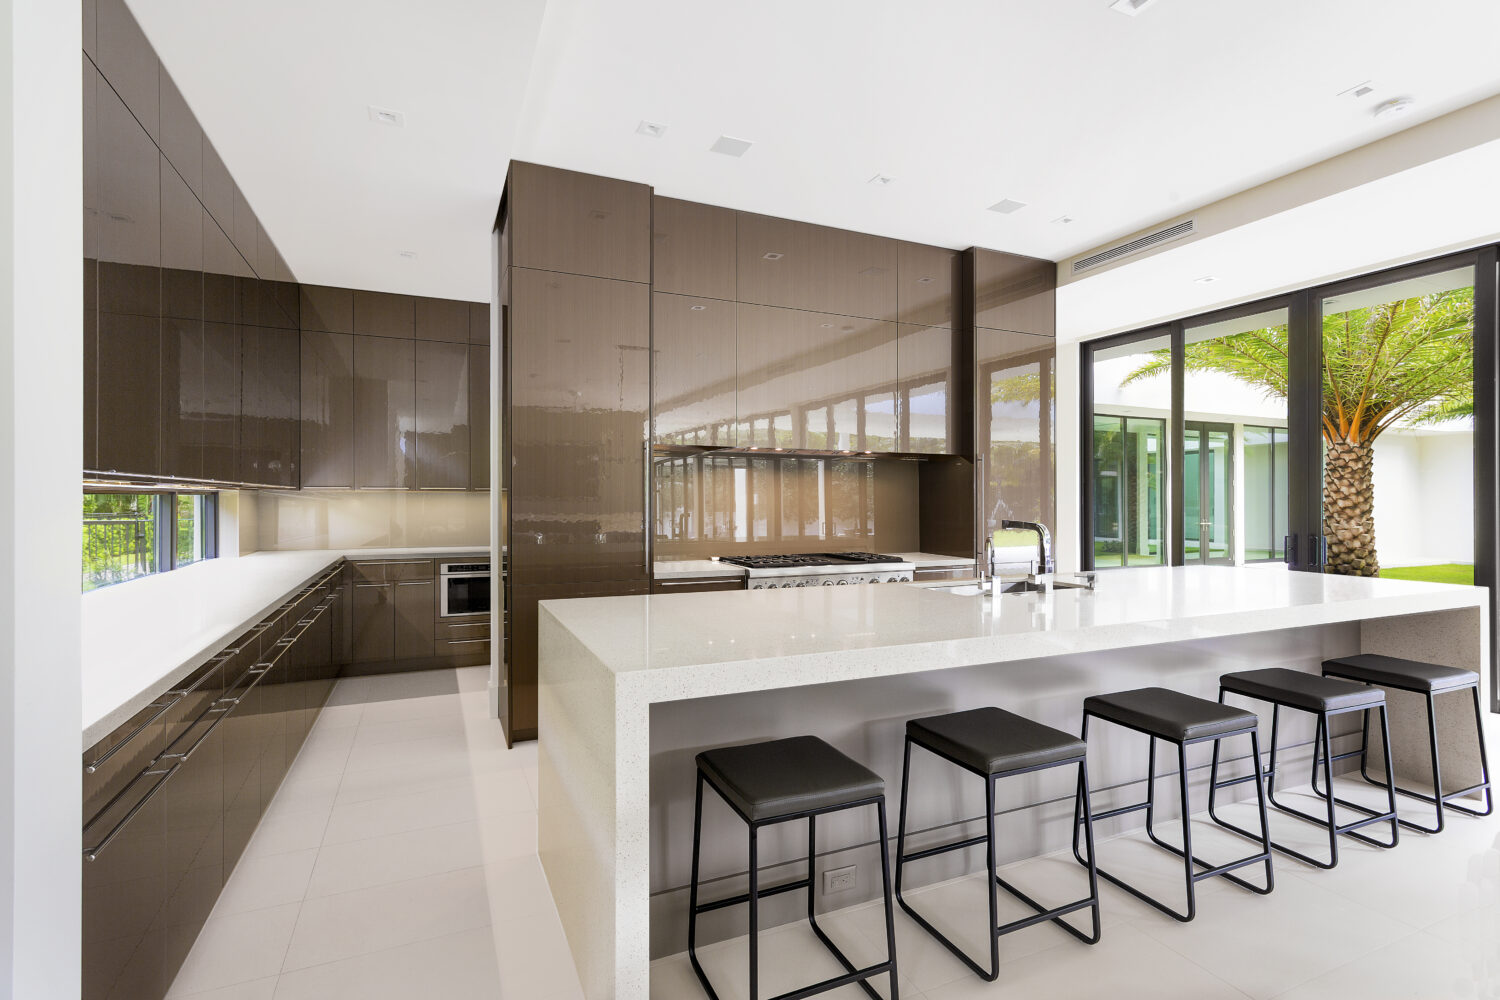 Ultra Modern Kitchen with a Sleek and Glossy Style - Dura Supreme Cabinetry